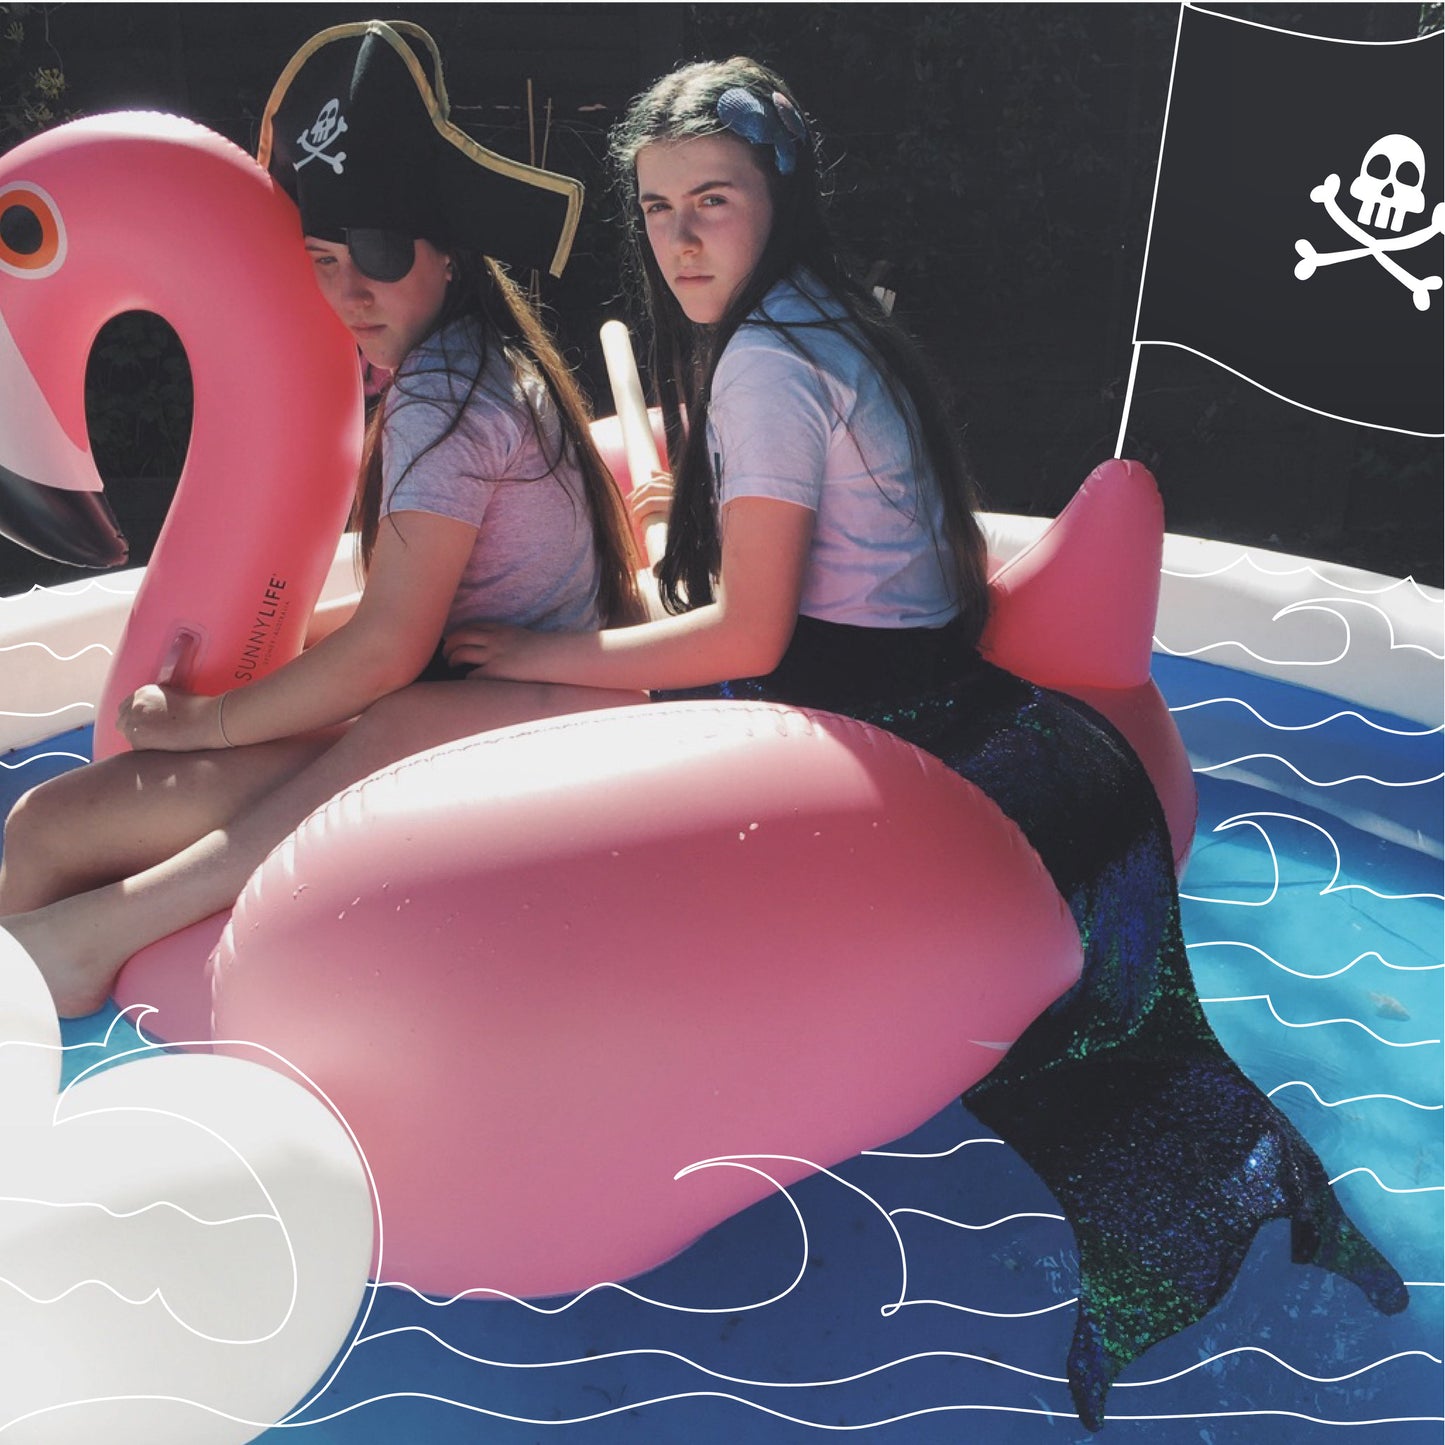 Children wearing a pirate costume and a mermaid costume by For Just ONE Day. Sat on a pink inflatable flamingo 